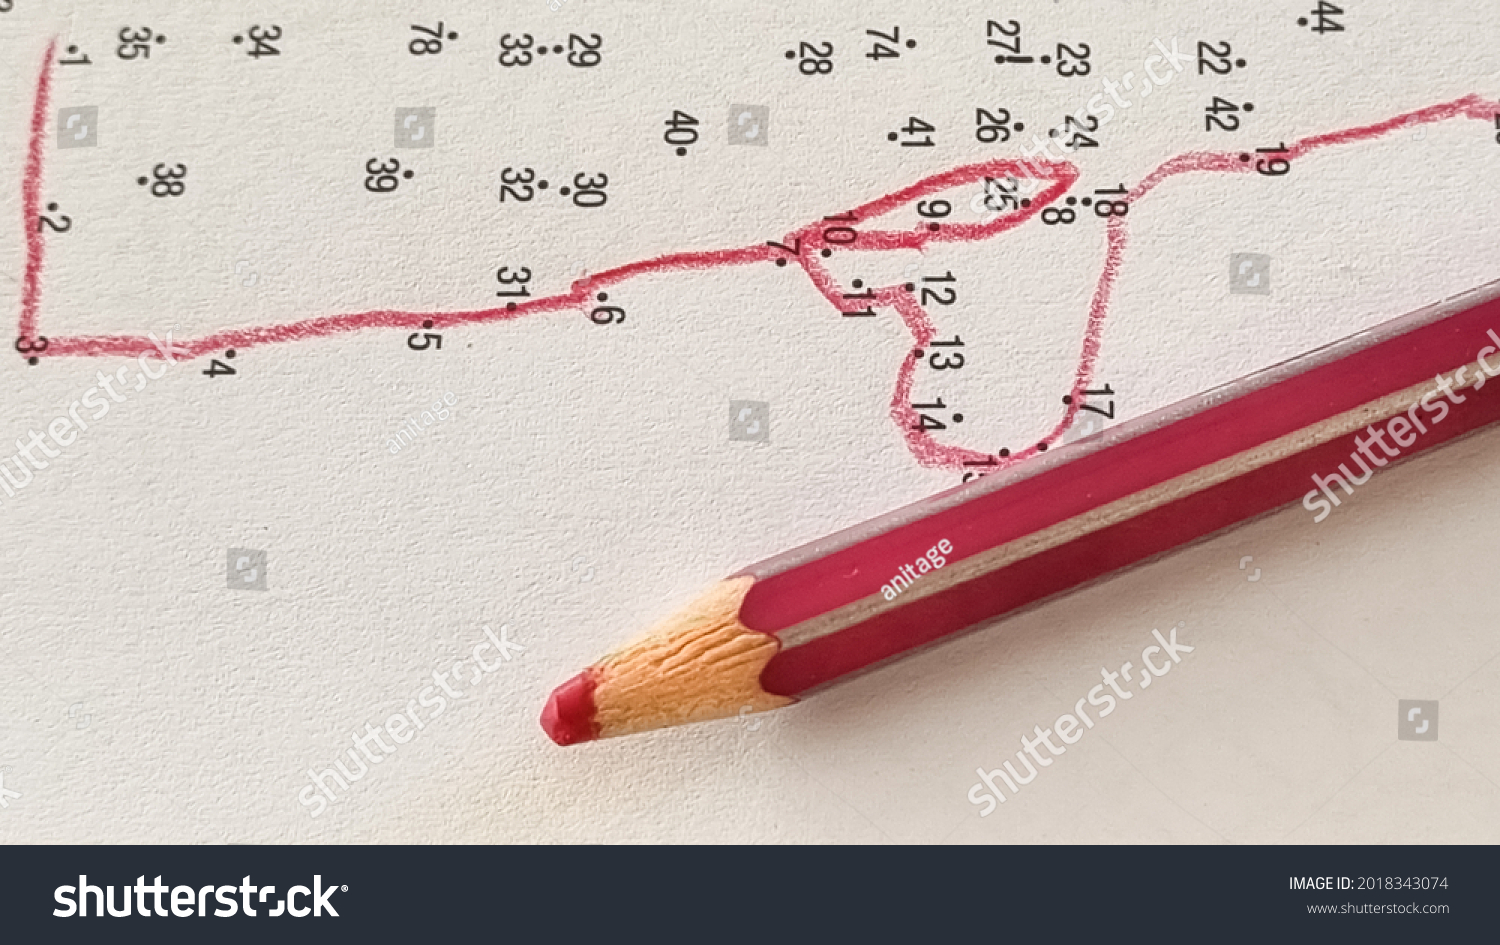  Connecting dots with numbers with a line with a red pencil. Drawing game. No straight lines. Step by step, small steps, patience concept. Close up. #2018343074